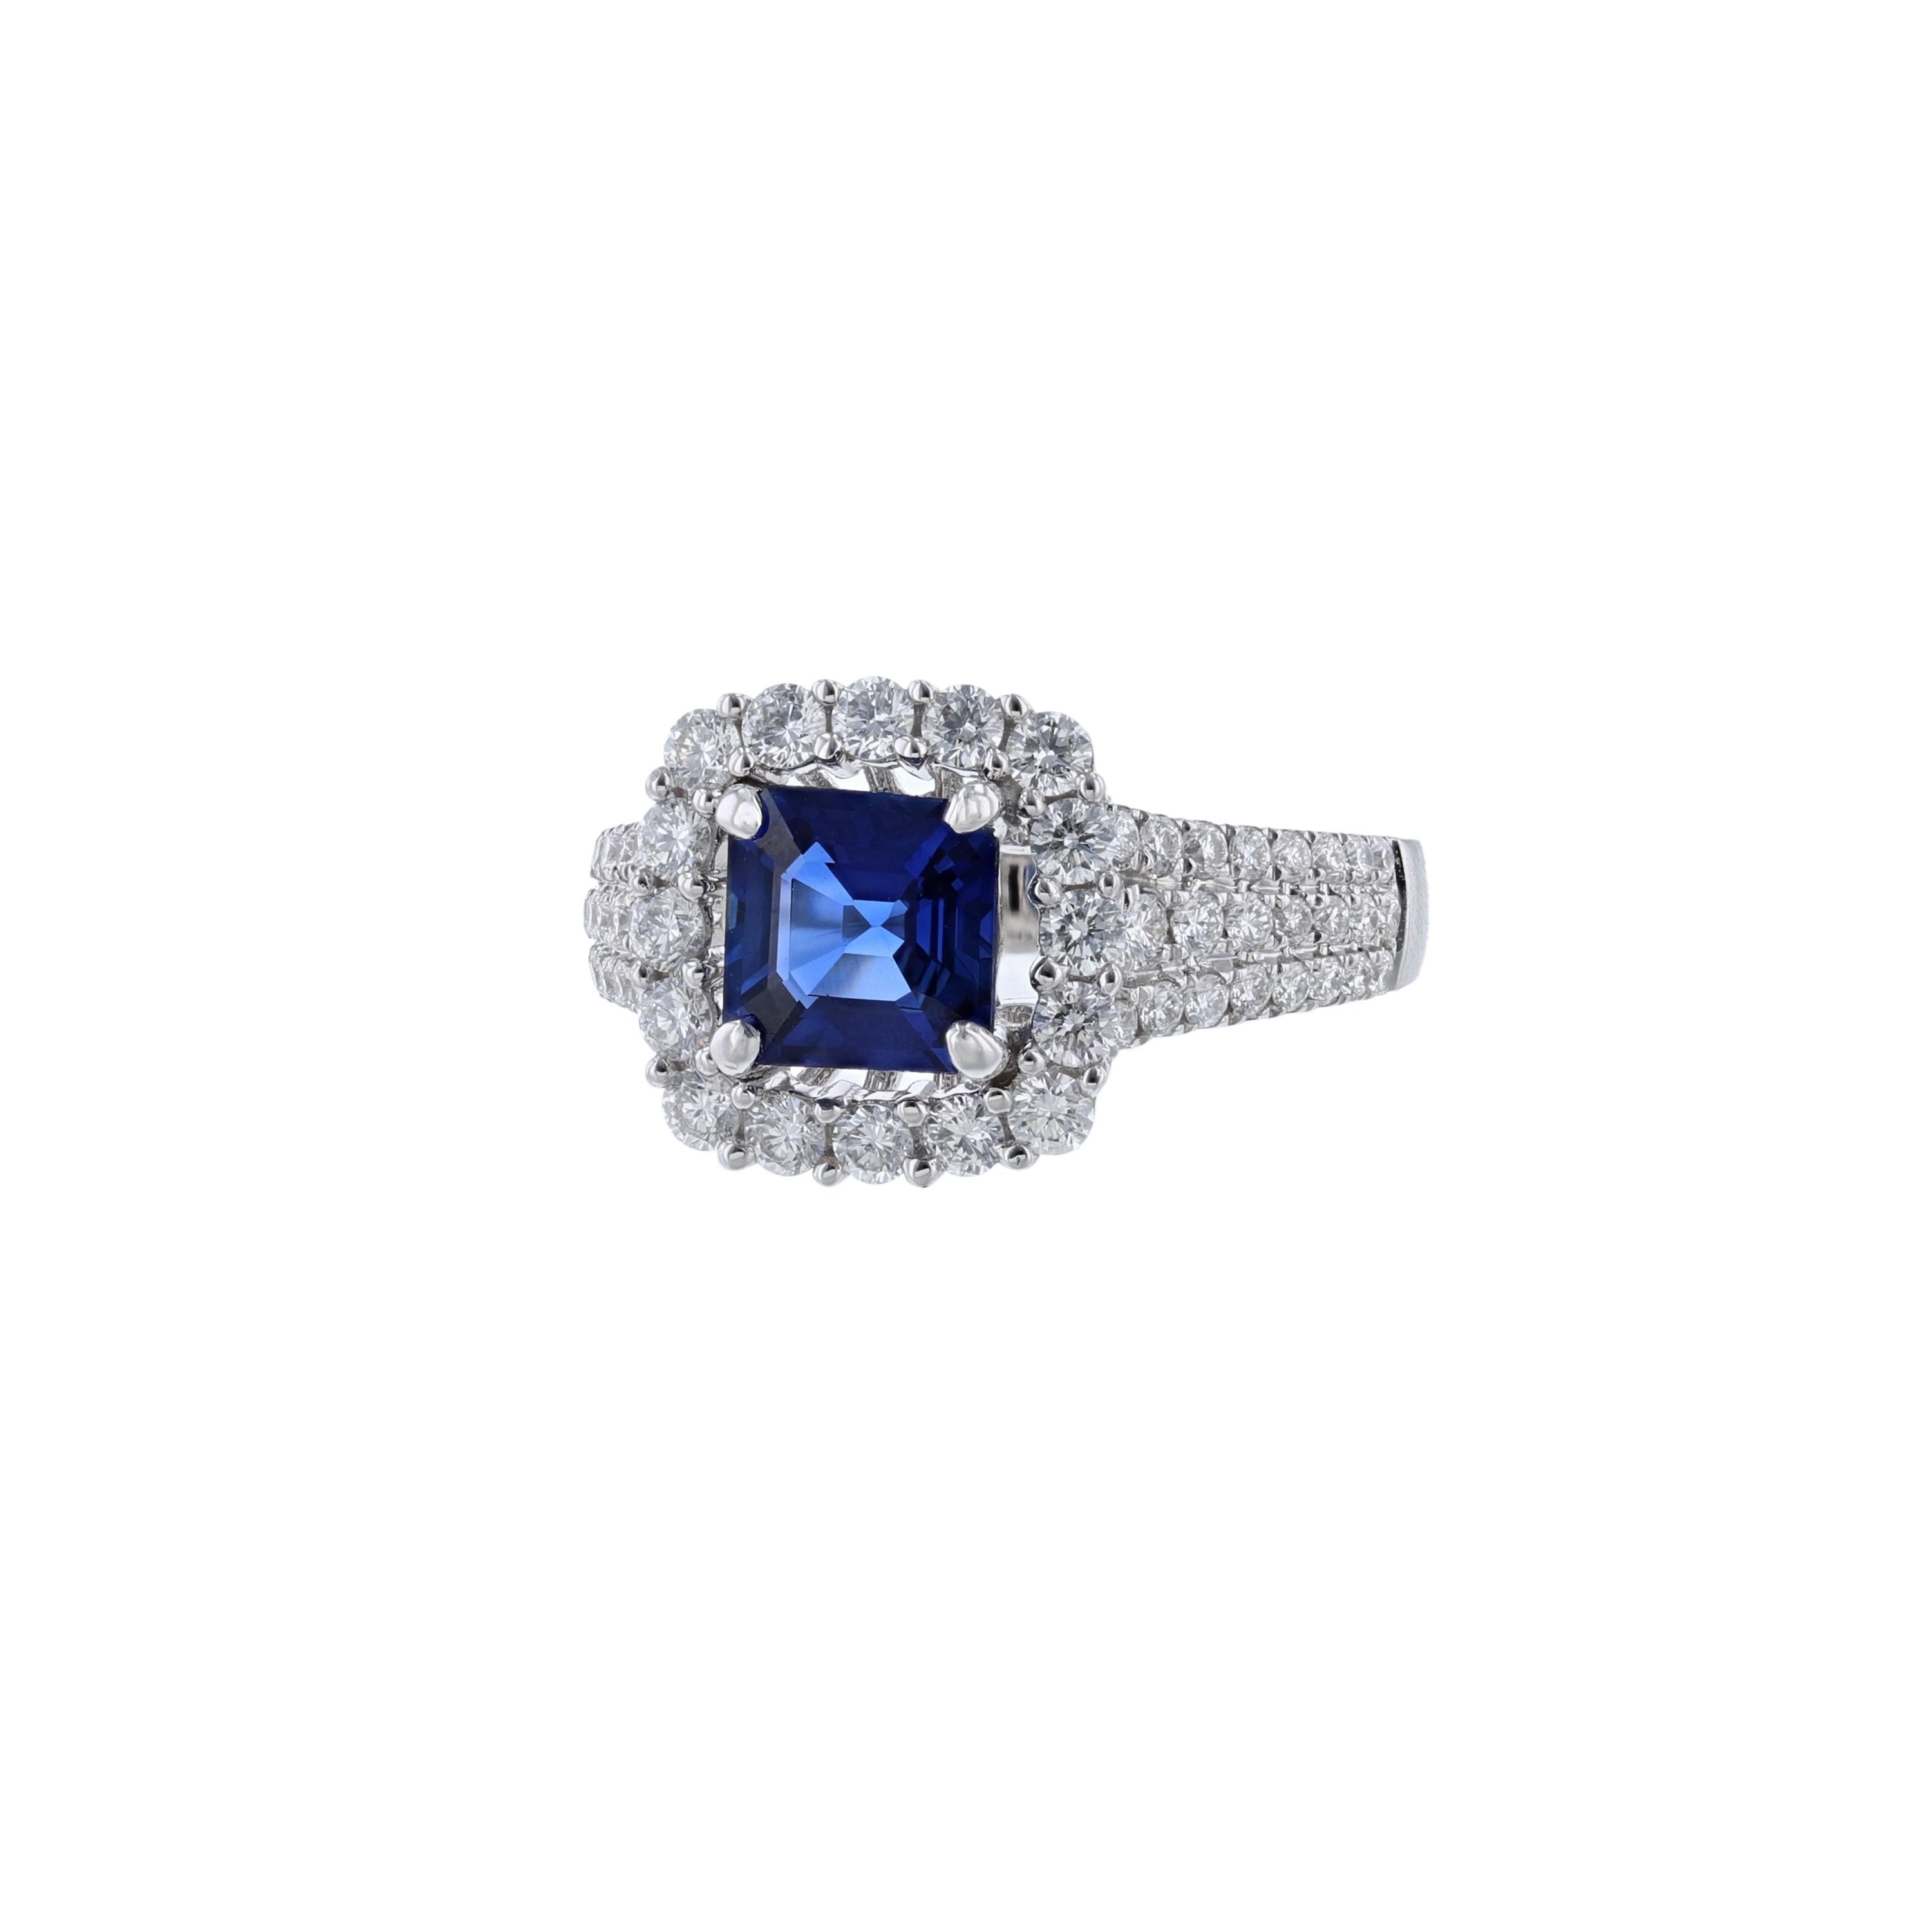 This ring is made in 18K white gold and features 1 asscher cut blue sapphire weighing 1.49 carat. Also, the ring features 62 round cut diamonds weighing 0.97 carat. With a color grade (H) and clarity (SI1). GIA Certified Number 5161365702.